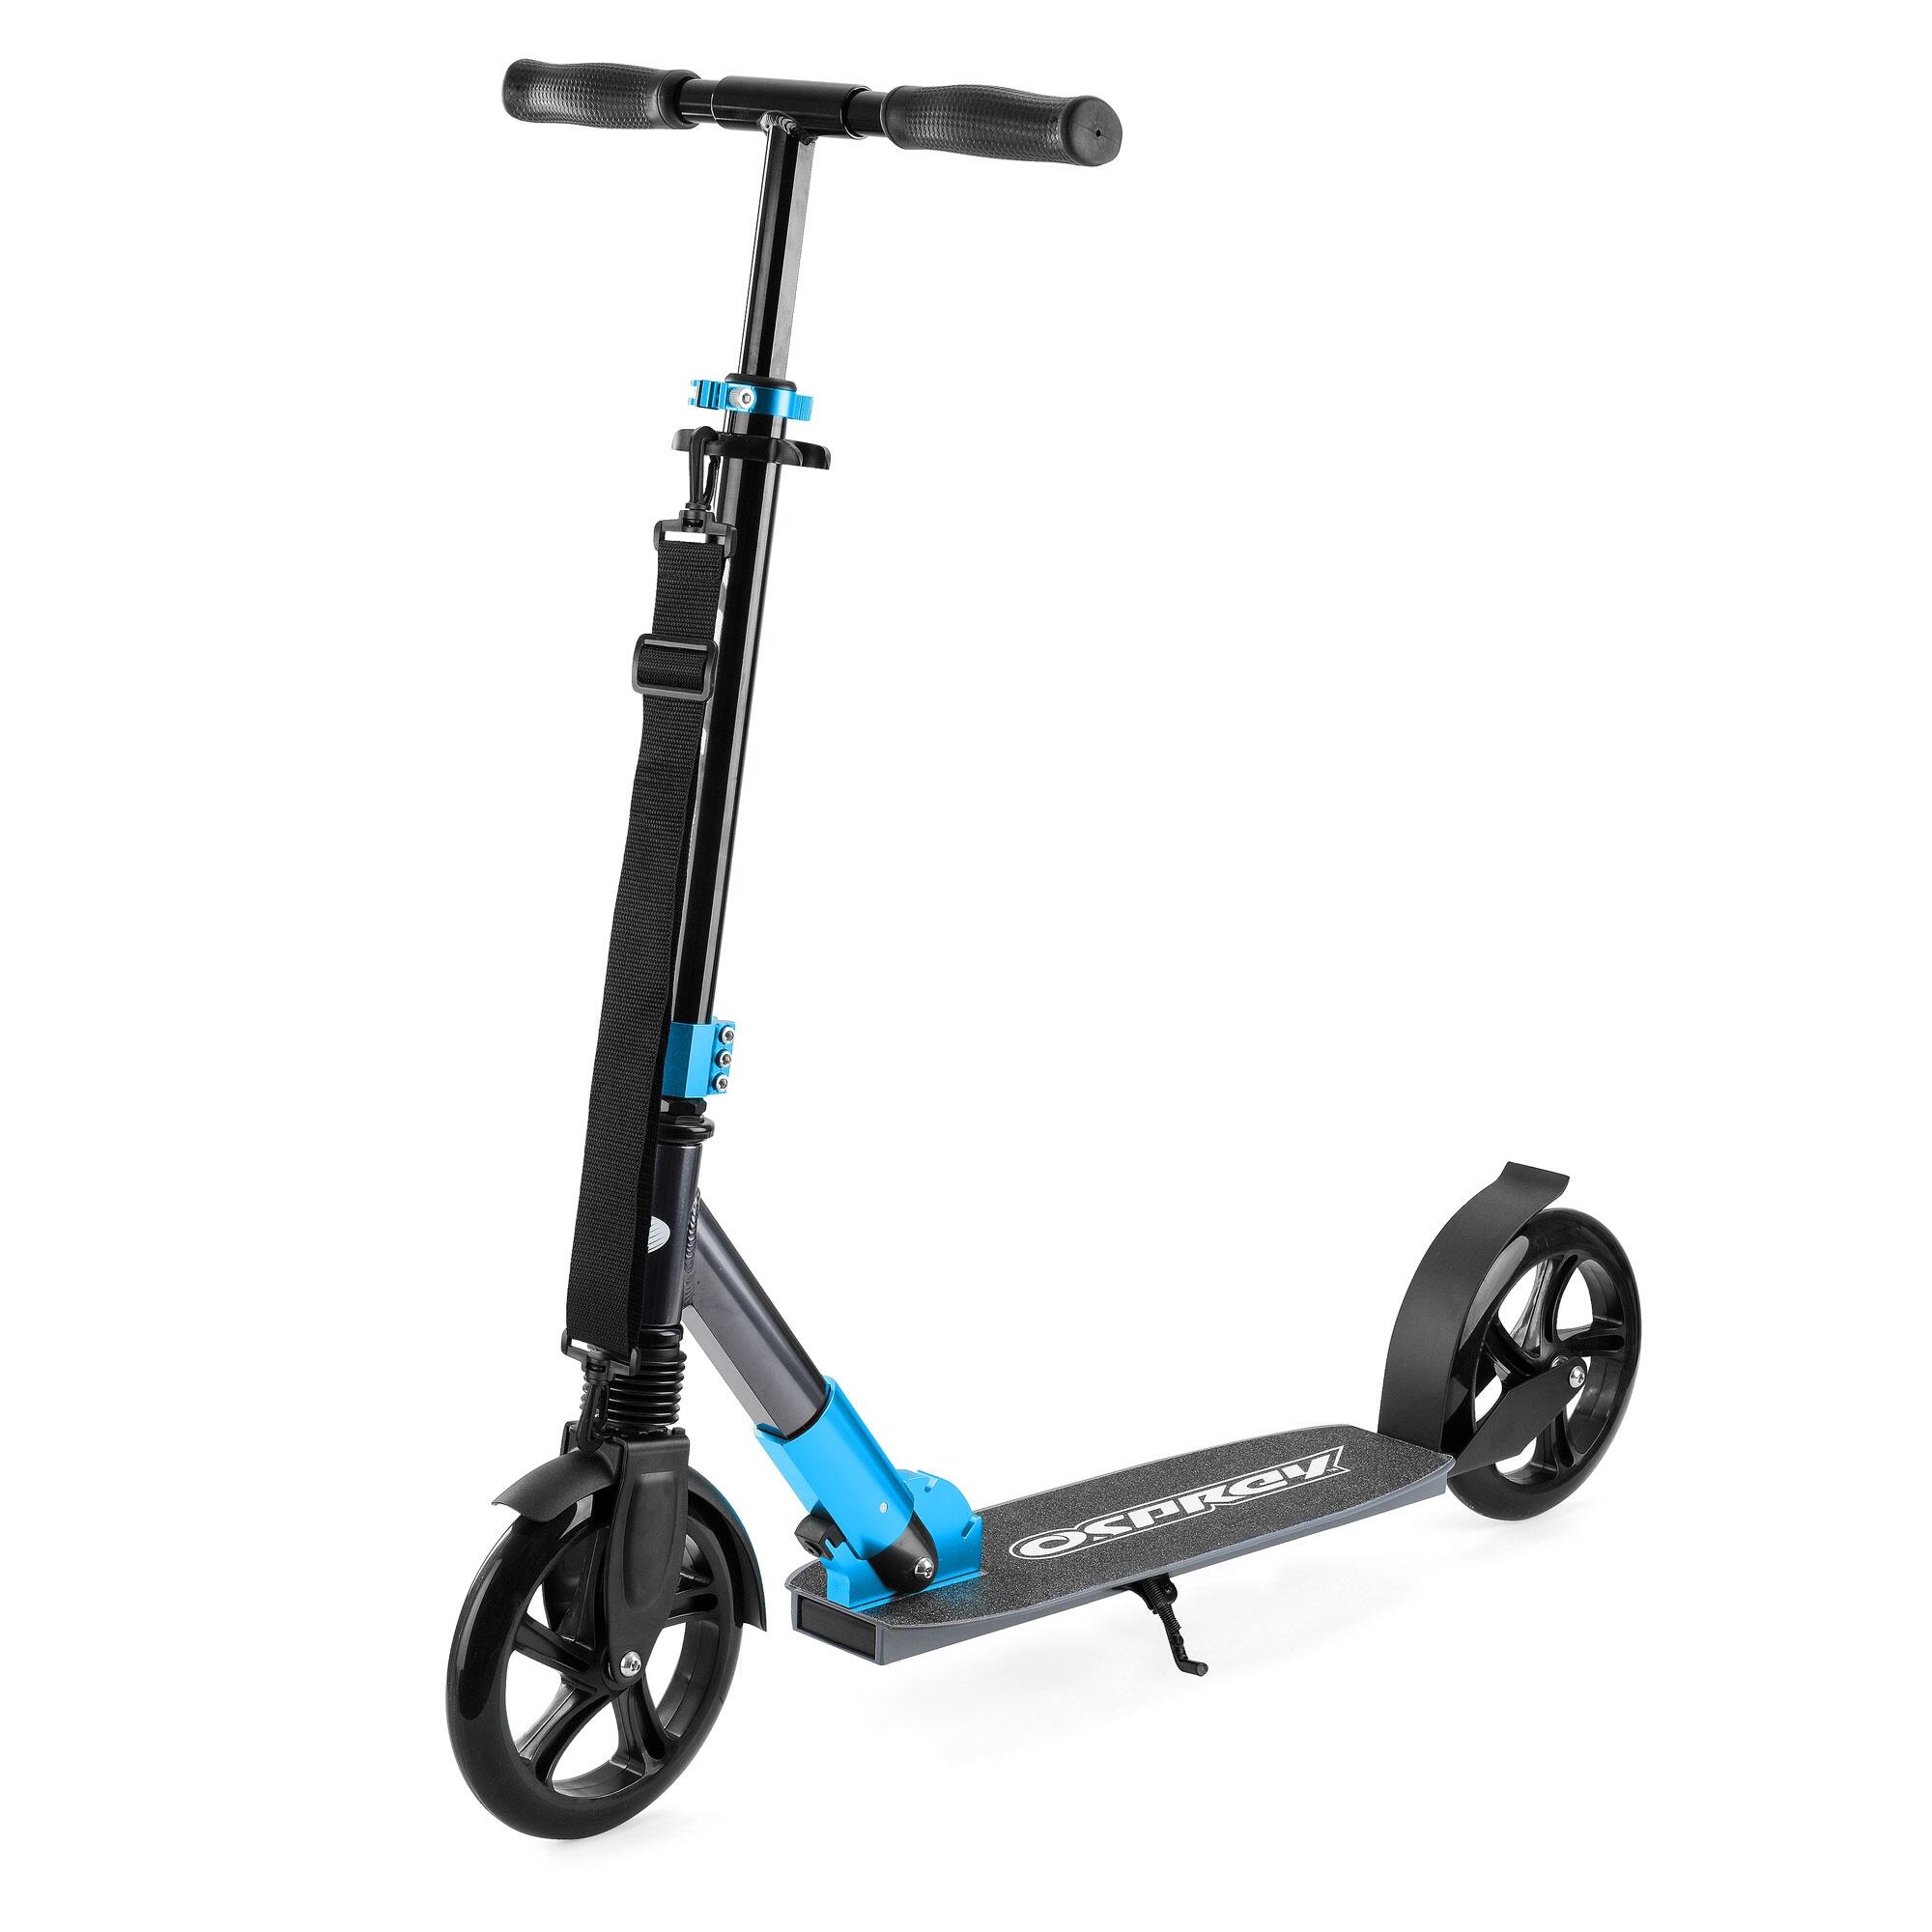 OSPREY ACTION SPORTS Osprey Big Wheel Scooter, Foldable with Adjustable Handlebars Copper